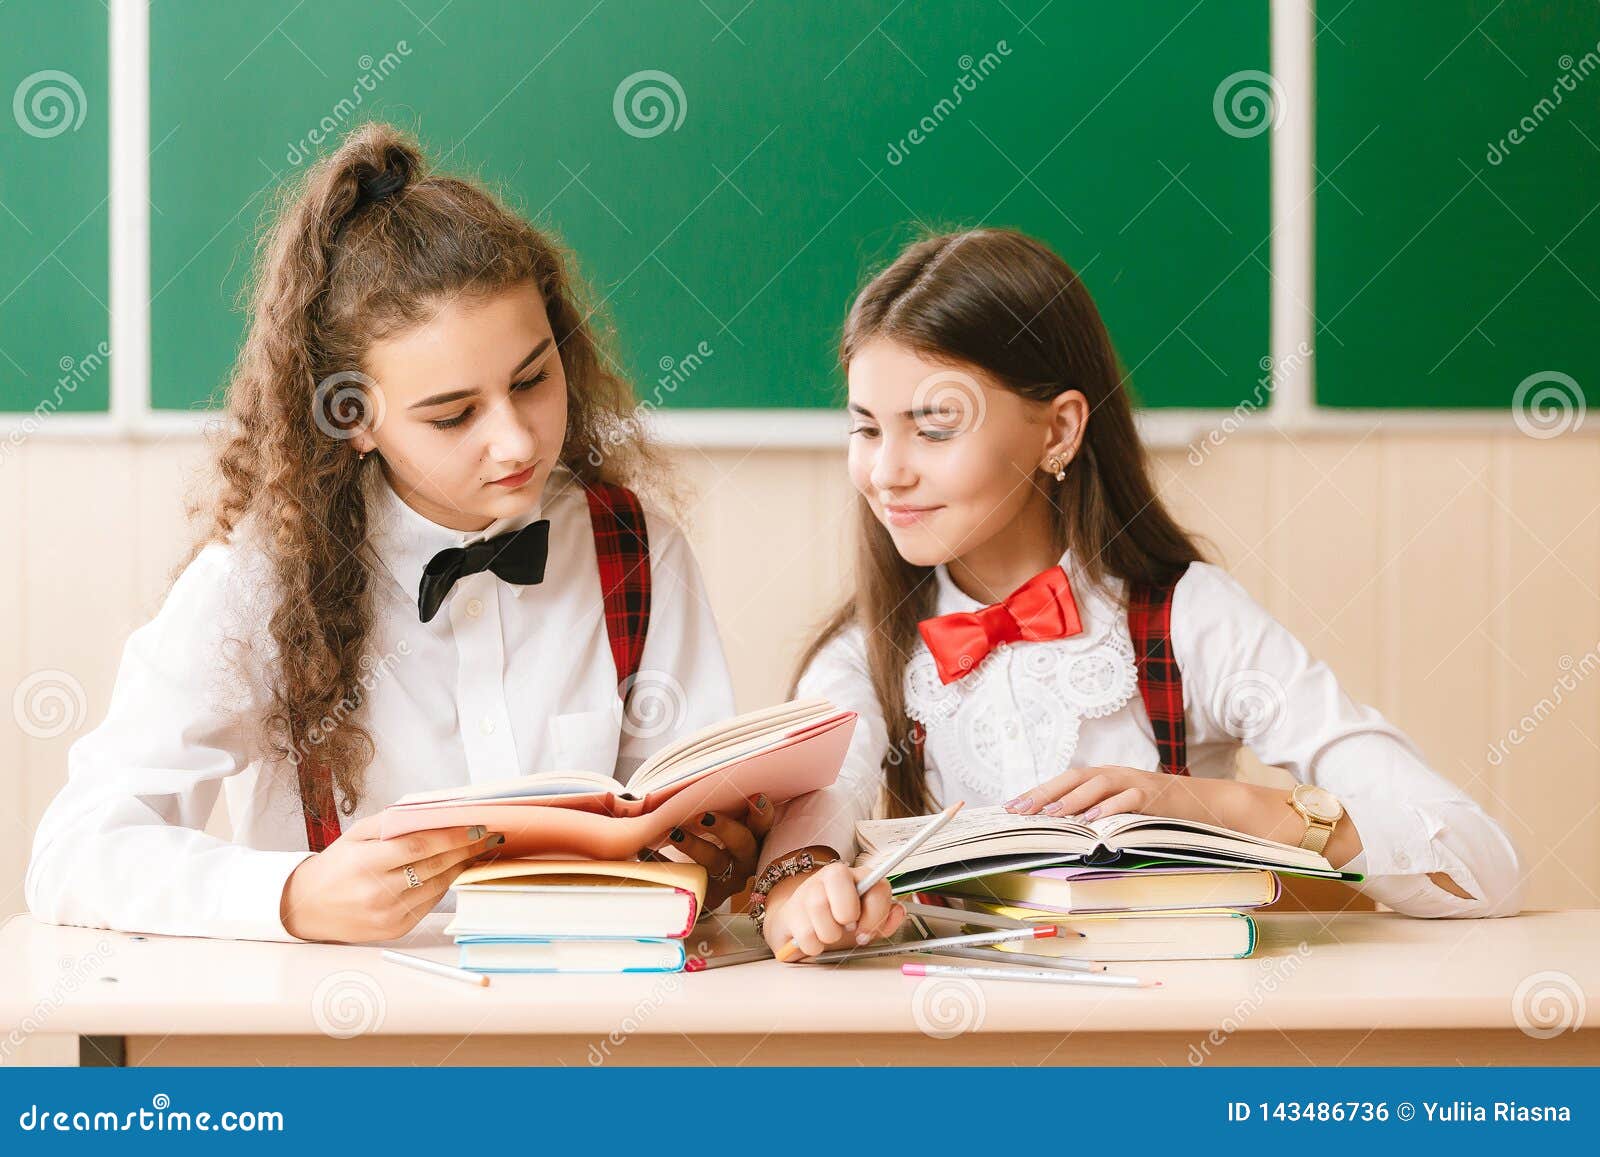 Two Beautiful Schoolgirls Are Sitting At The Desk With Books In The